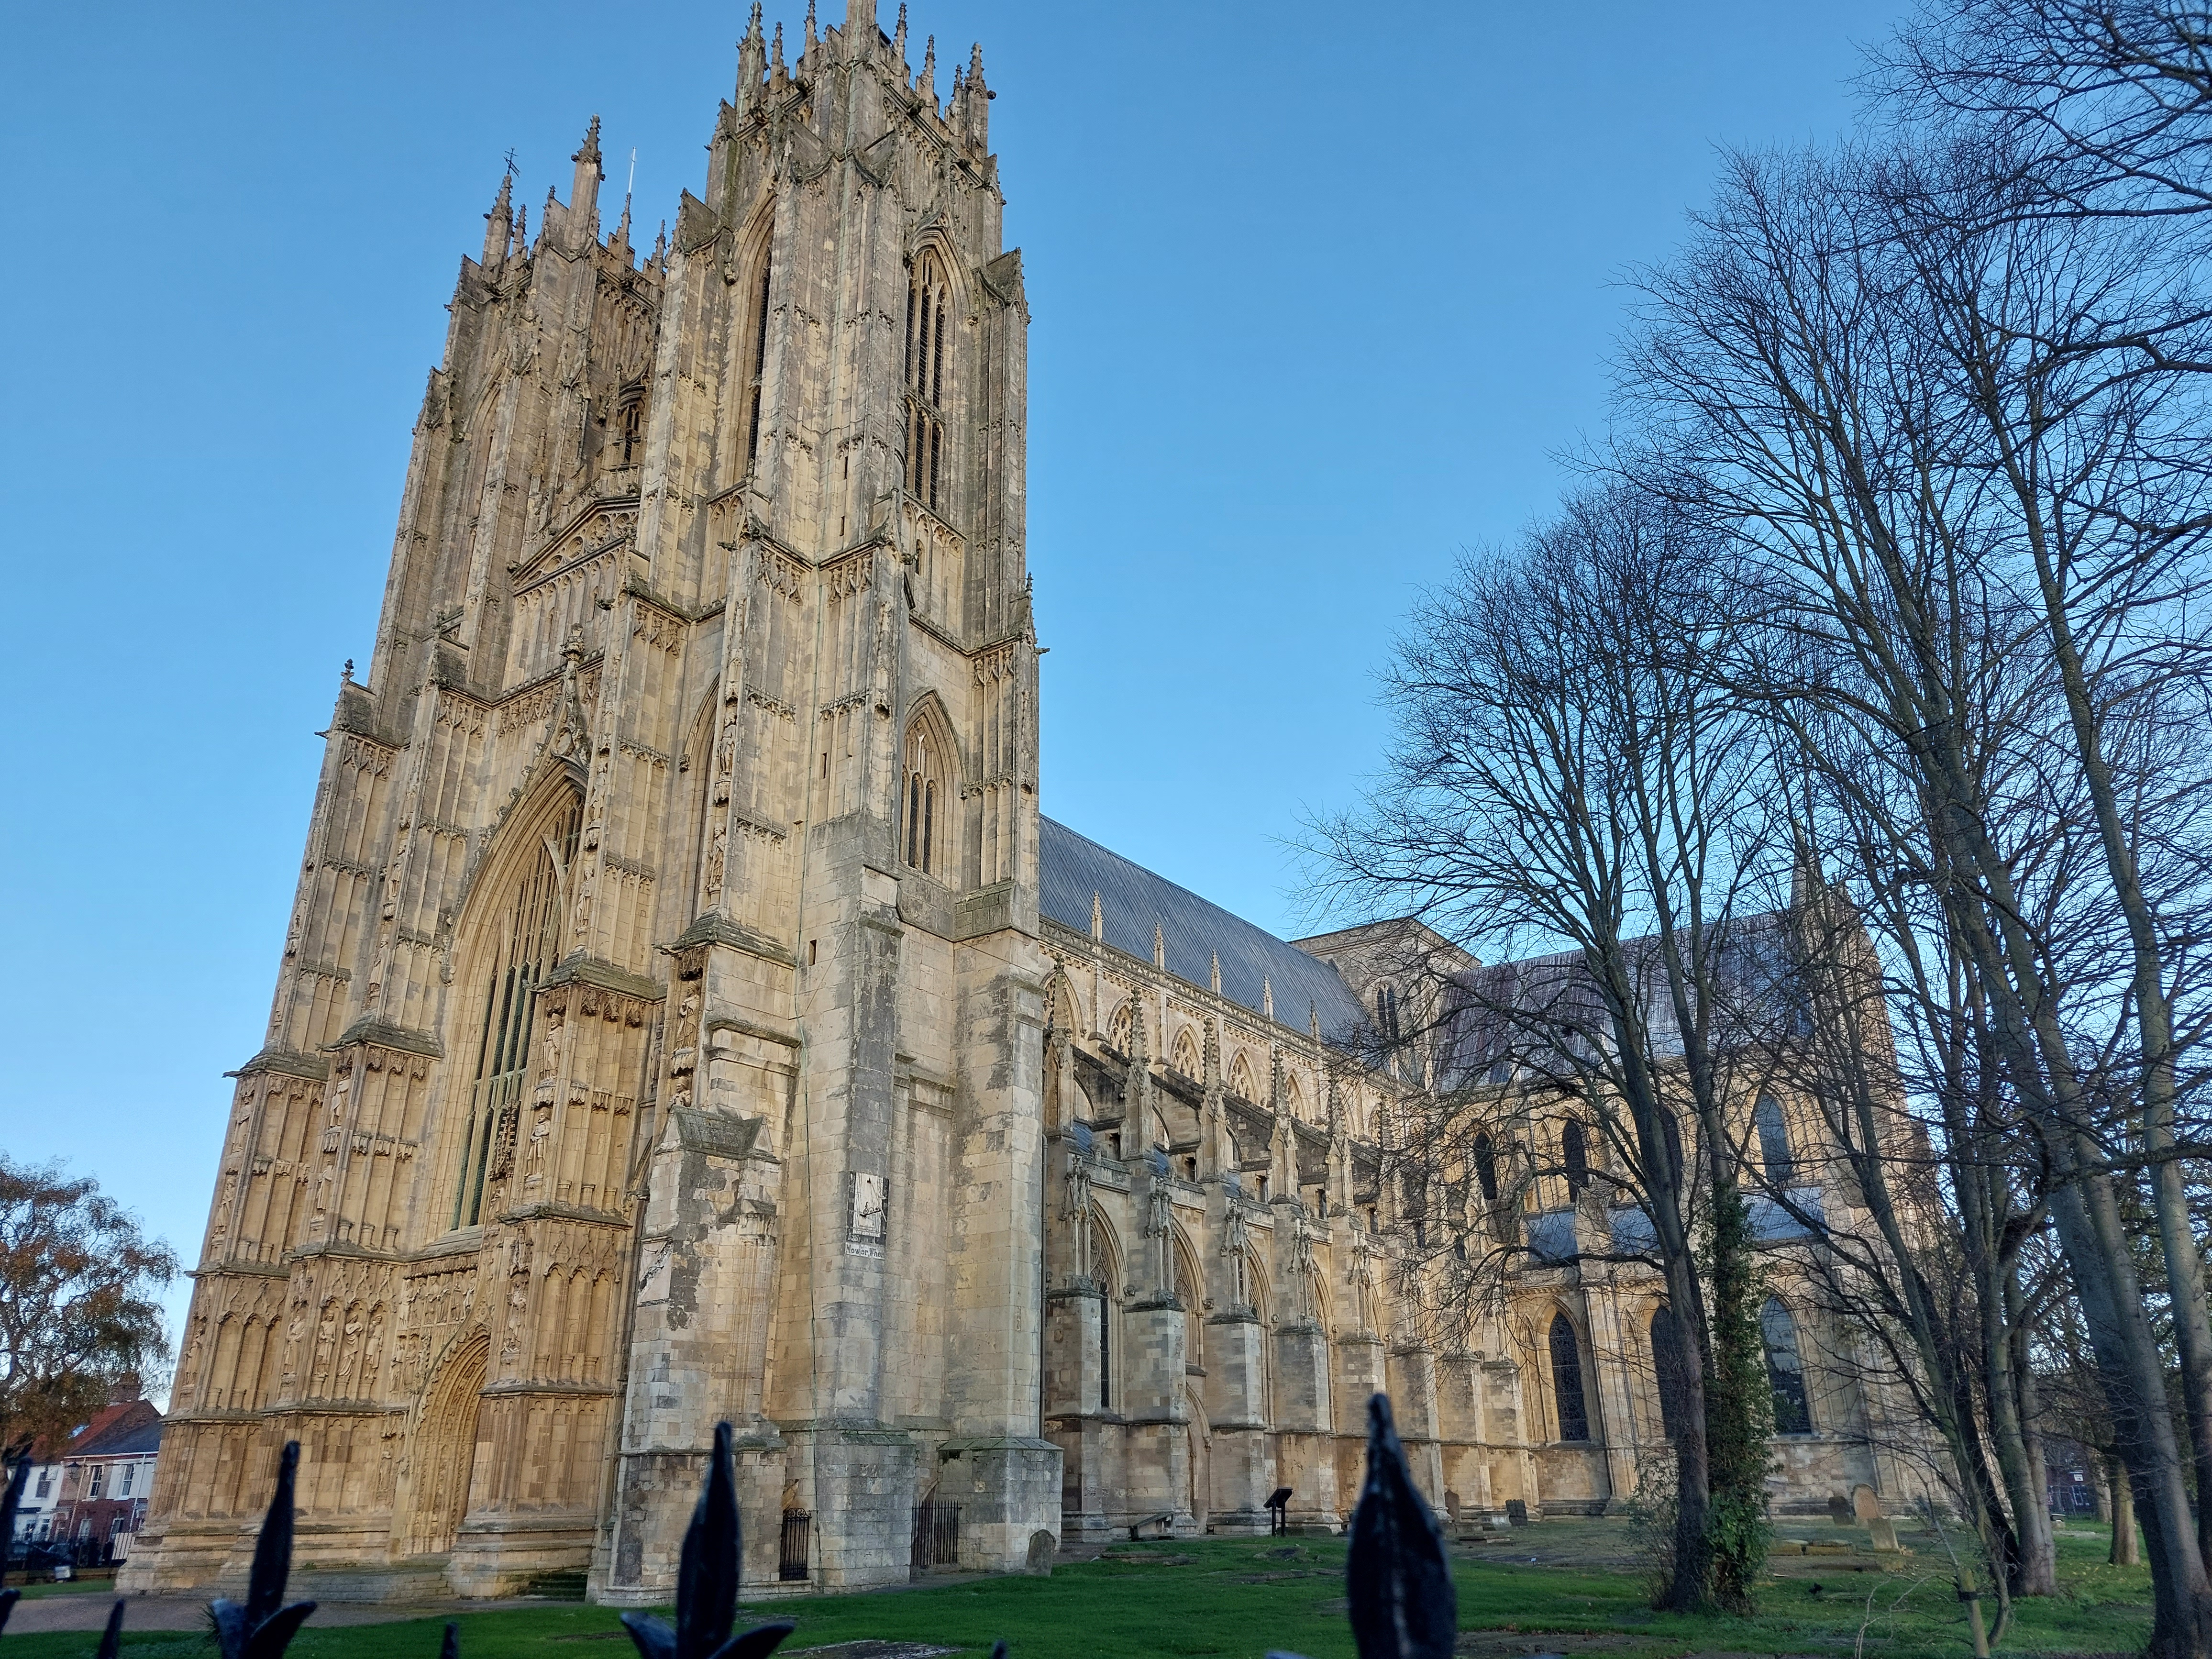 Medievalists take a historical and festive day trip to Beverley